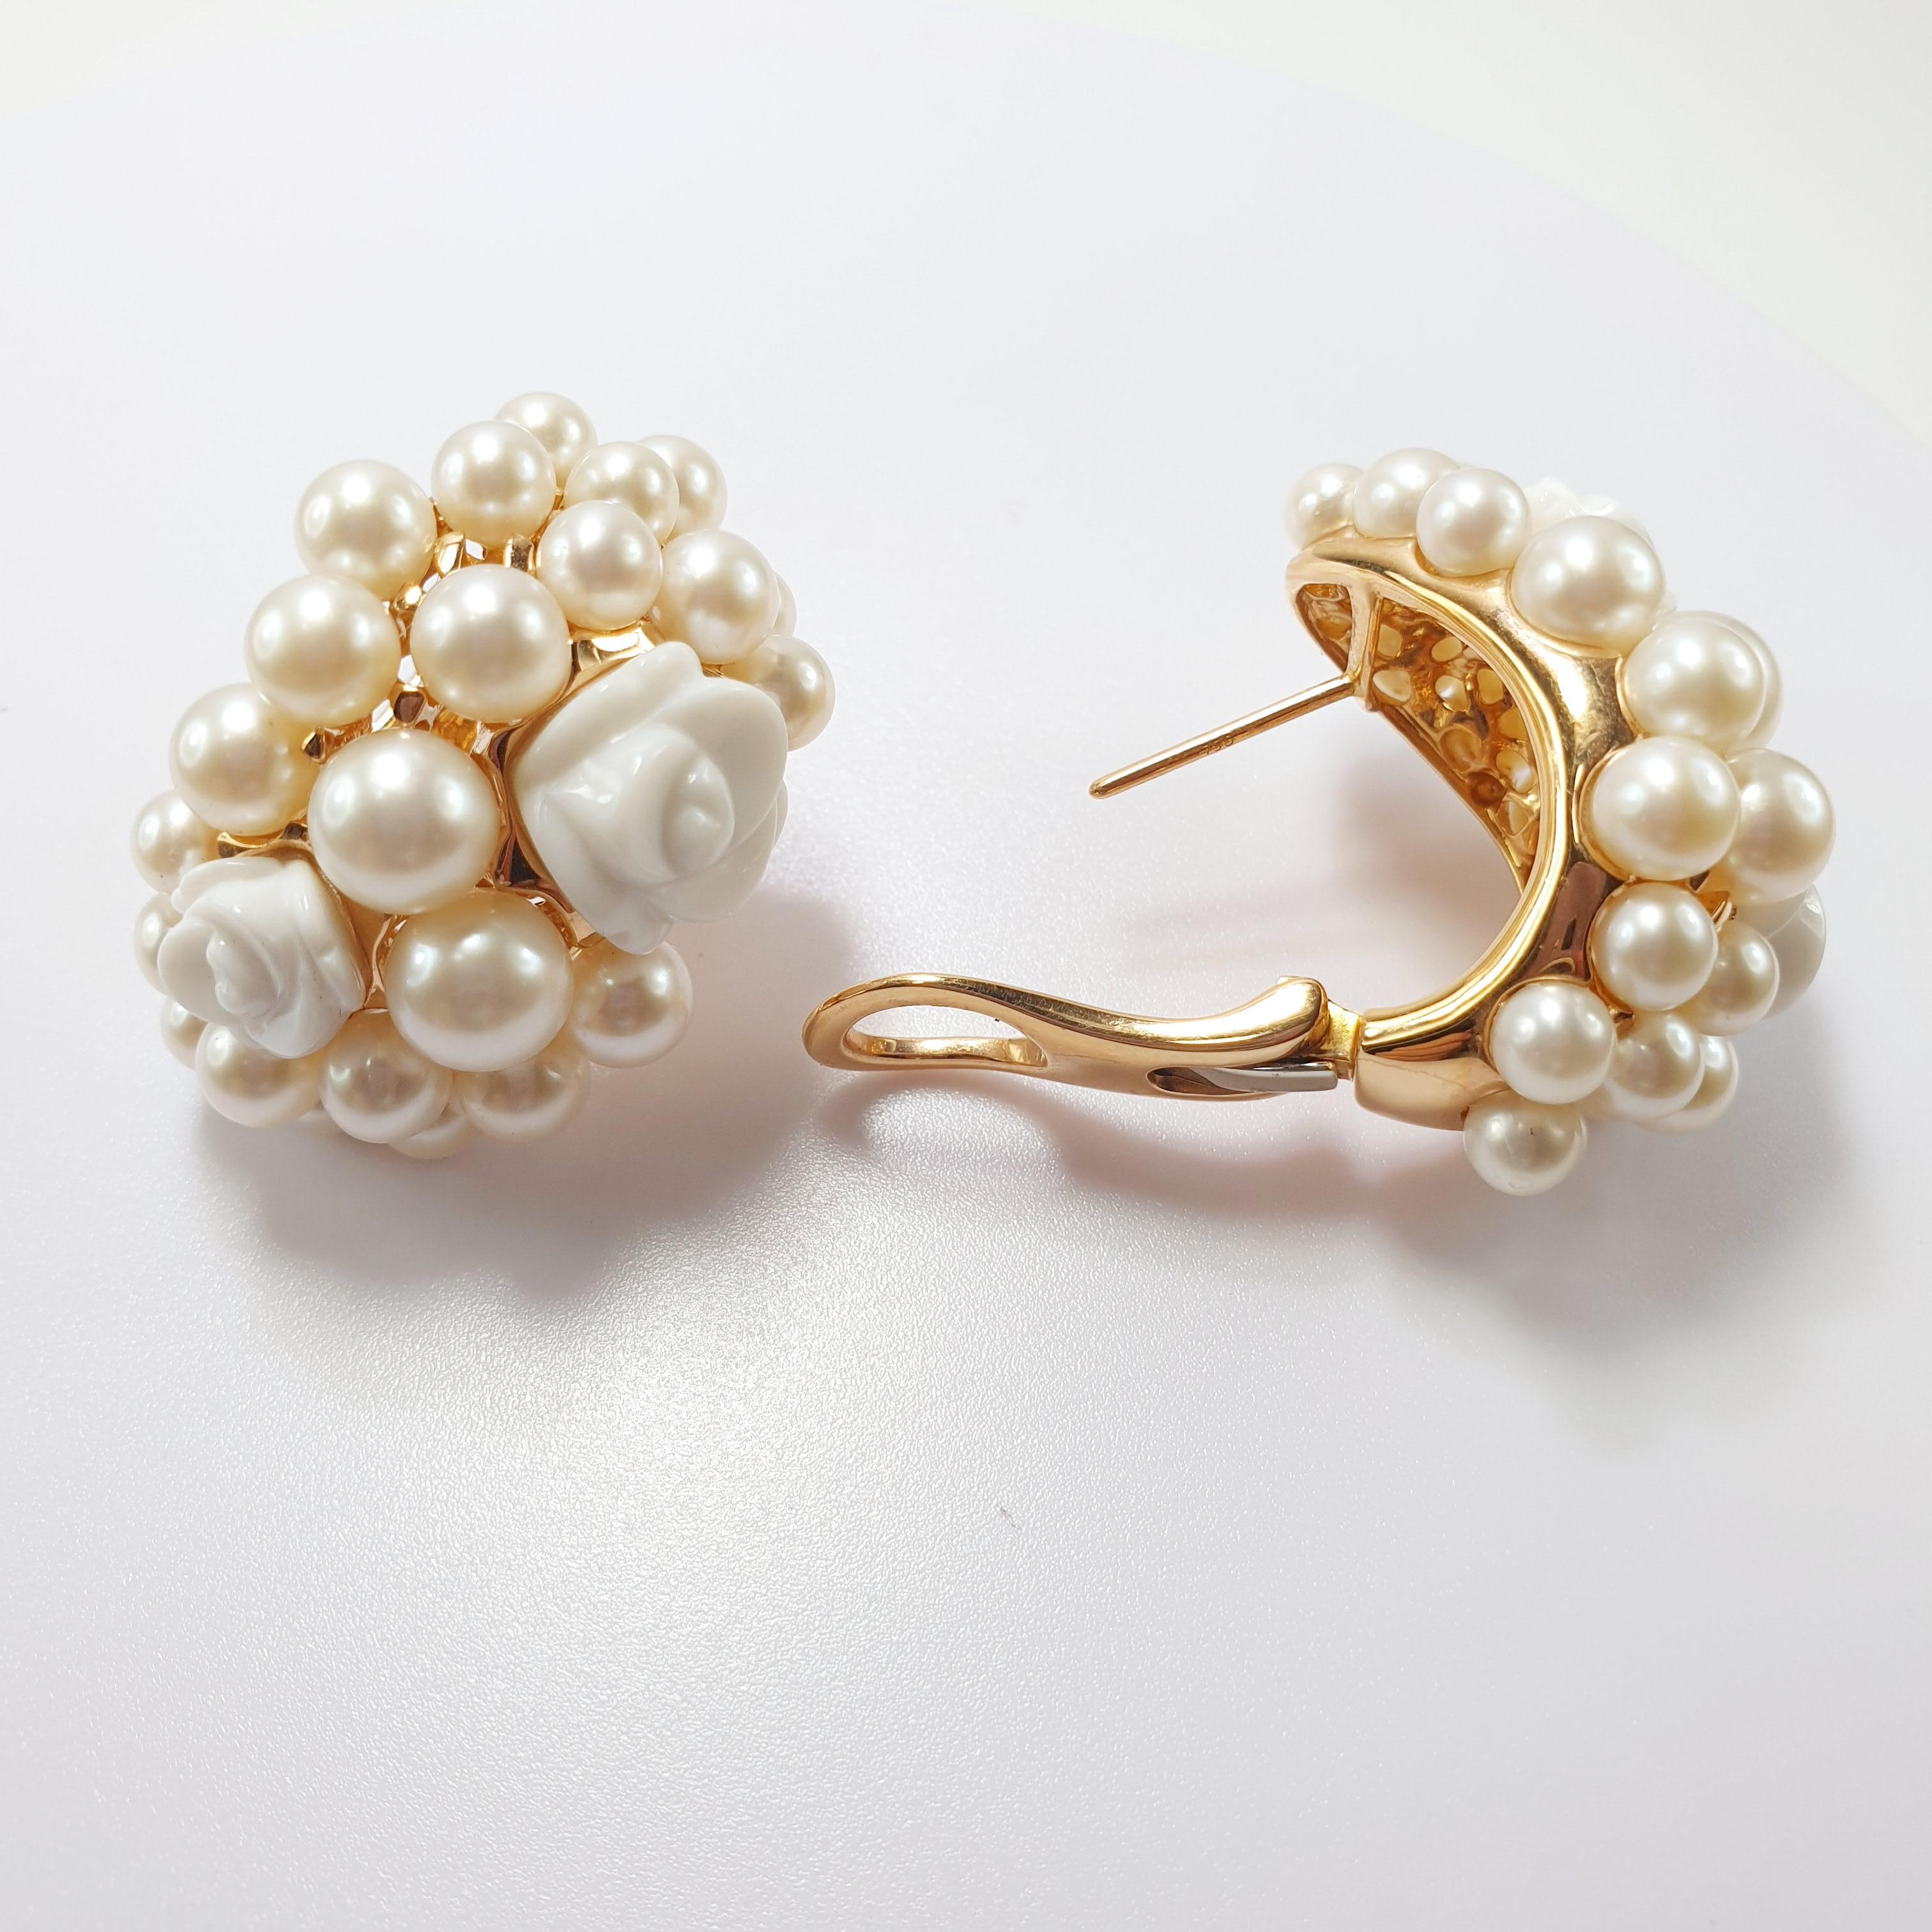 Contemporary Mimi Milano 18 Karat Rose Gold Earrings with Agate Flowers and Pearls